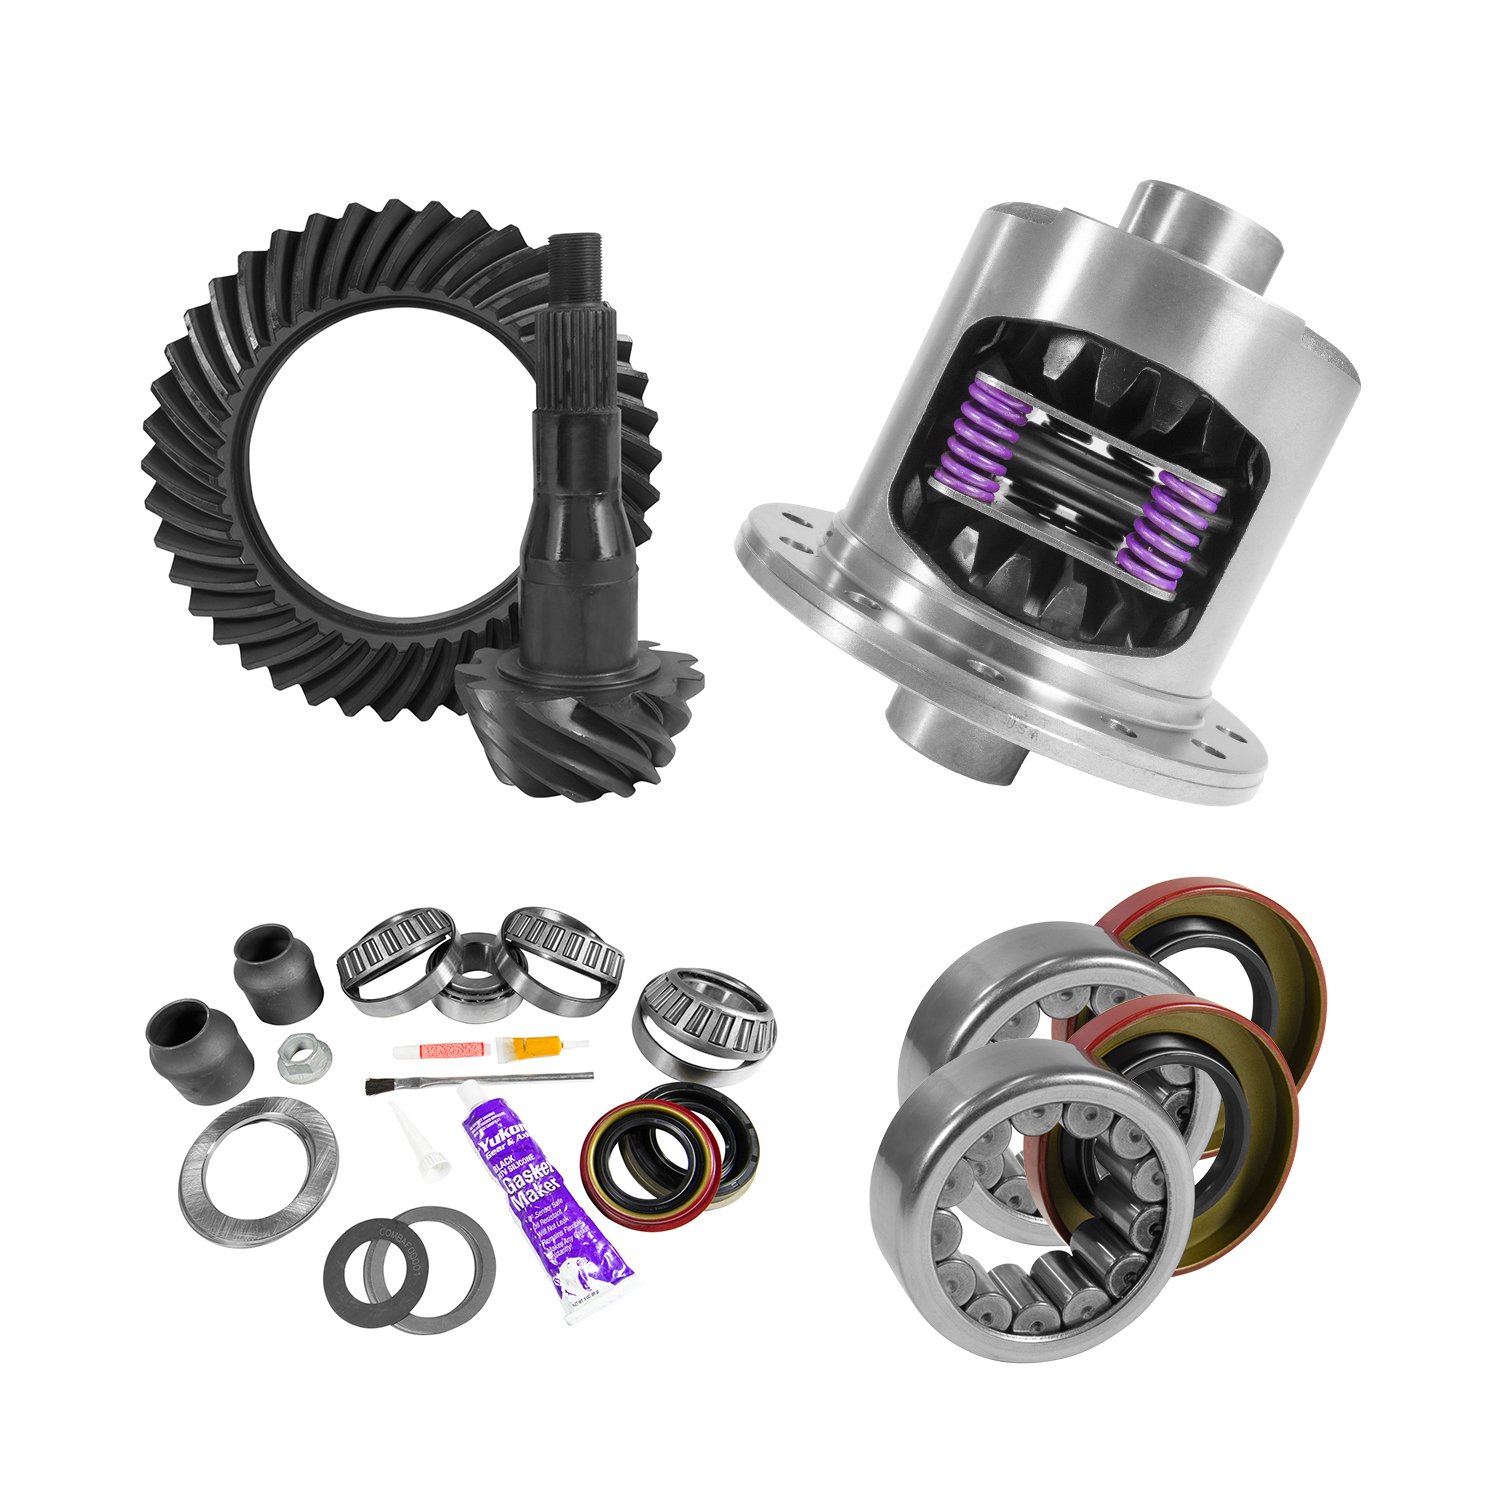 9.75 in. Ford 3.55 Rear Ring & Pinion, Install Kit, 34Spl Posi, 2.99 in. Axle Bearing